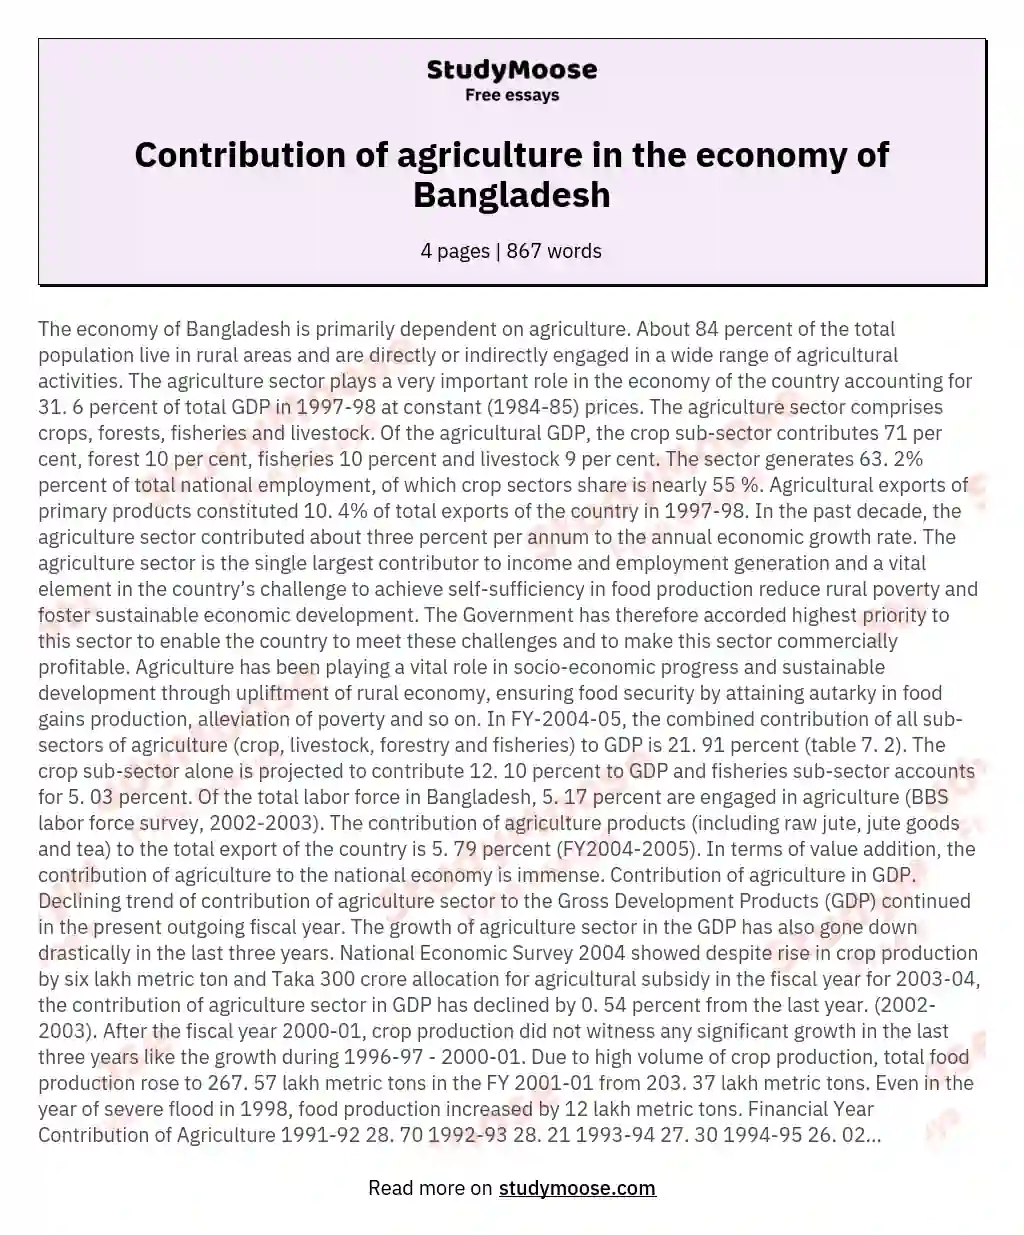 Contribution of agriculture in the economy of Bangladesh essay